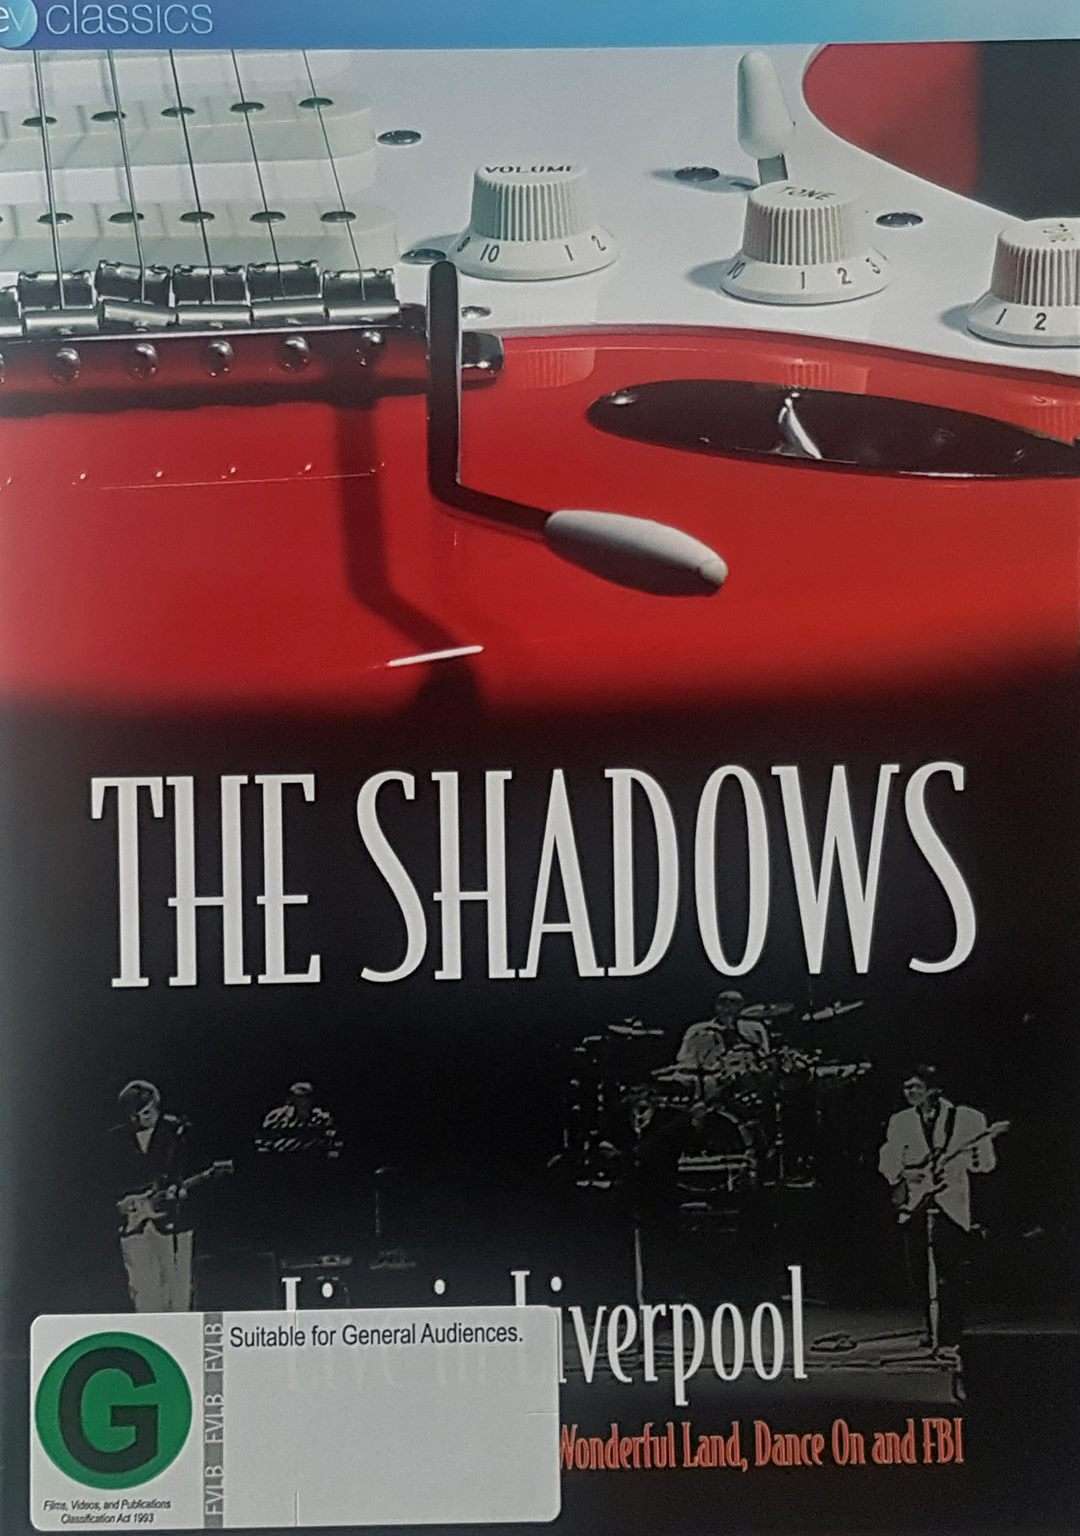 The Shadows Live from Liverpool